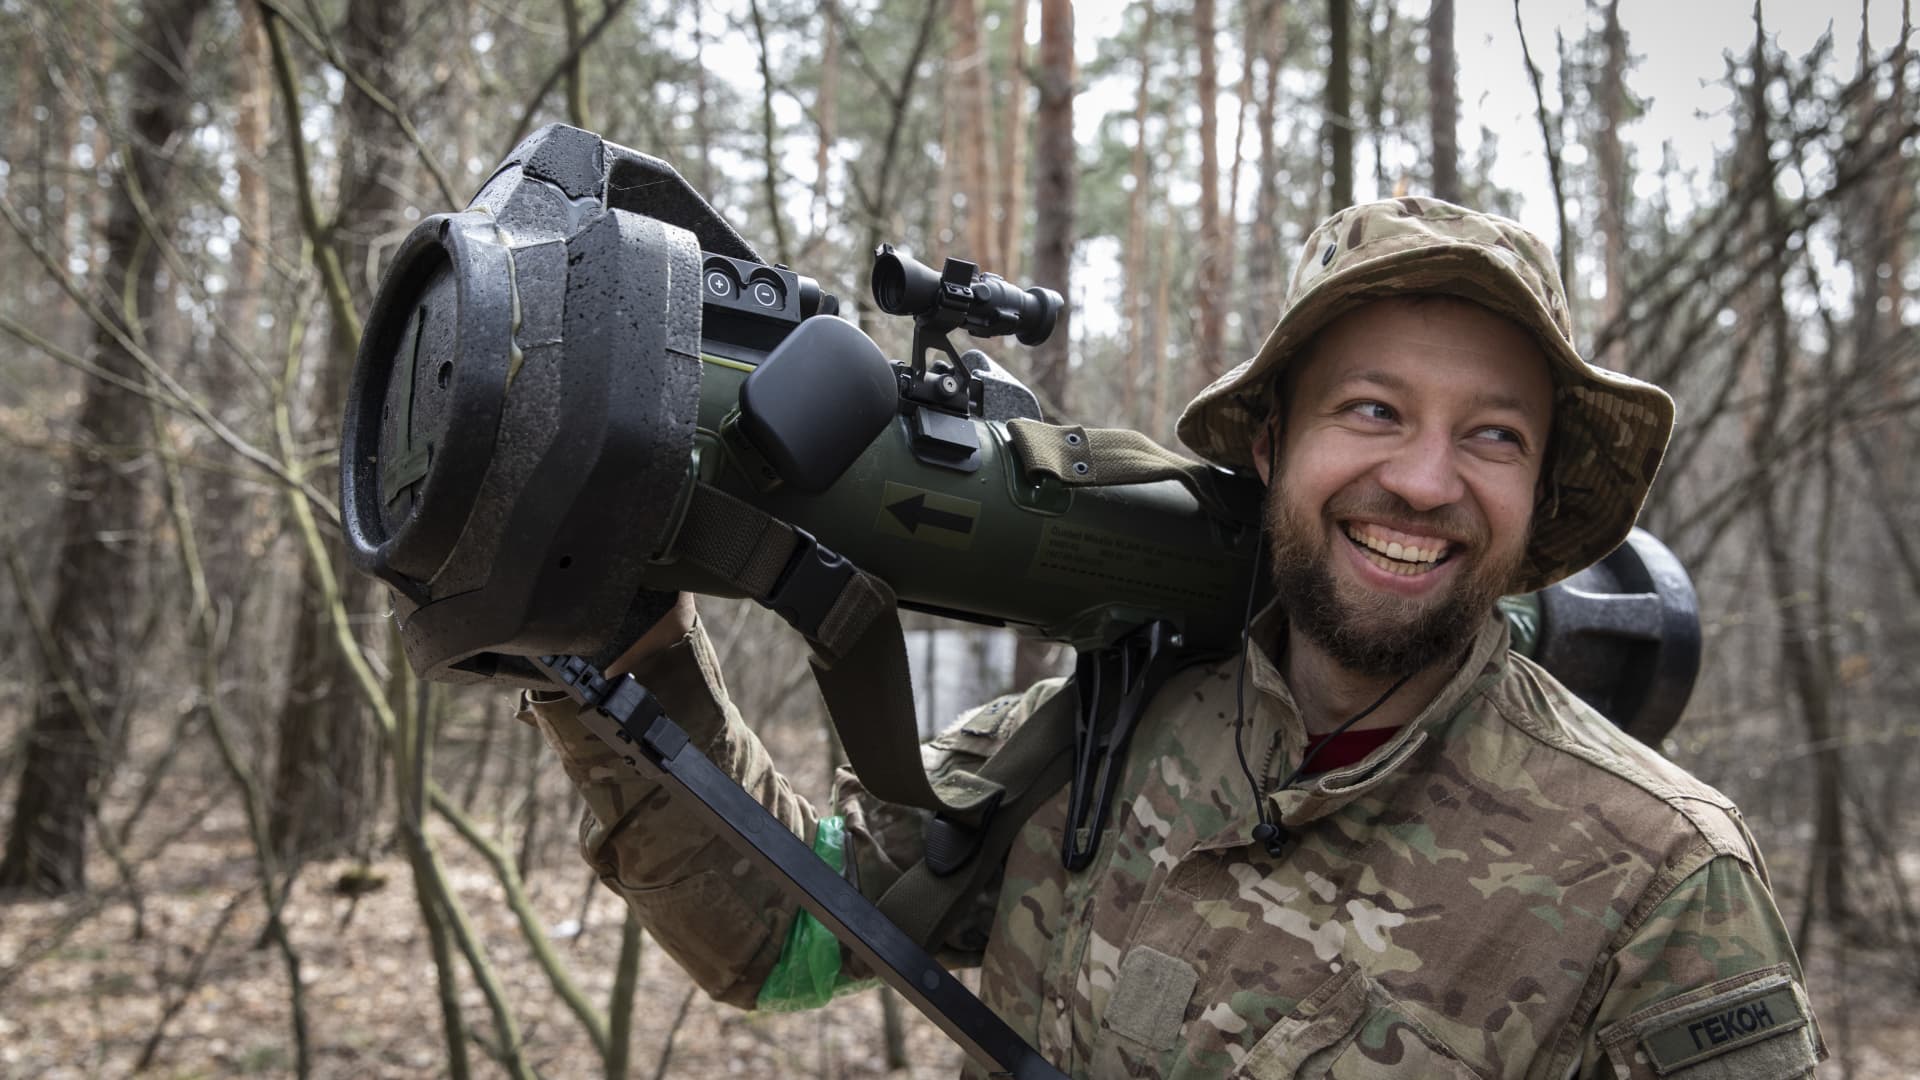 Oleg (31) smiles as he holds the MBT-NLAW (Next generation Light Anti-tank Weapon) provided by the United Kingdom.